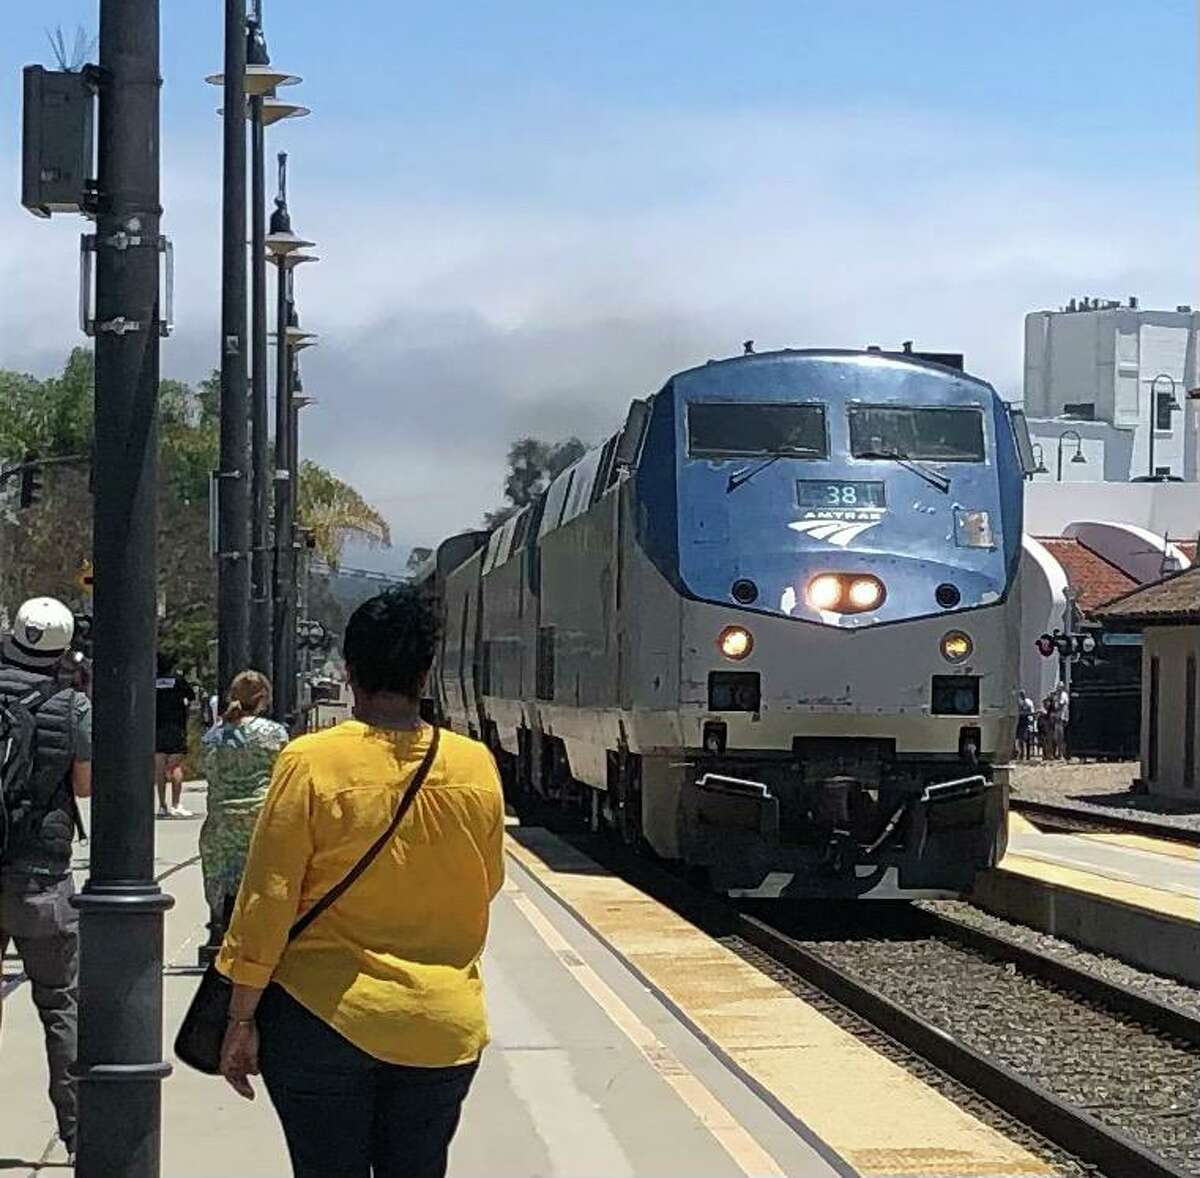 The northbound Coast Starlight arrives at Santa Barbara for the travelers’ return trip to Emeryville.